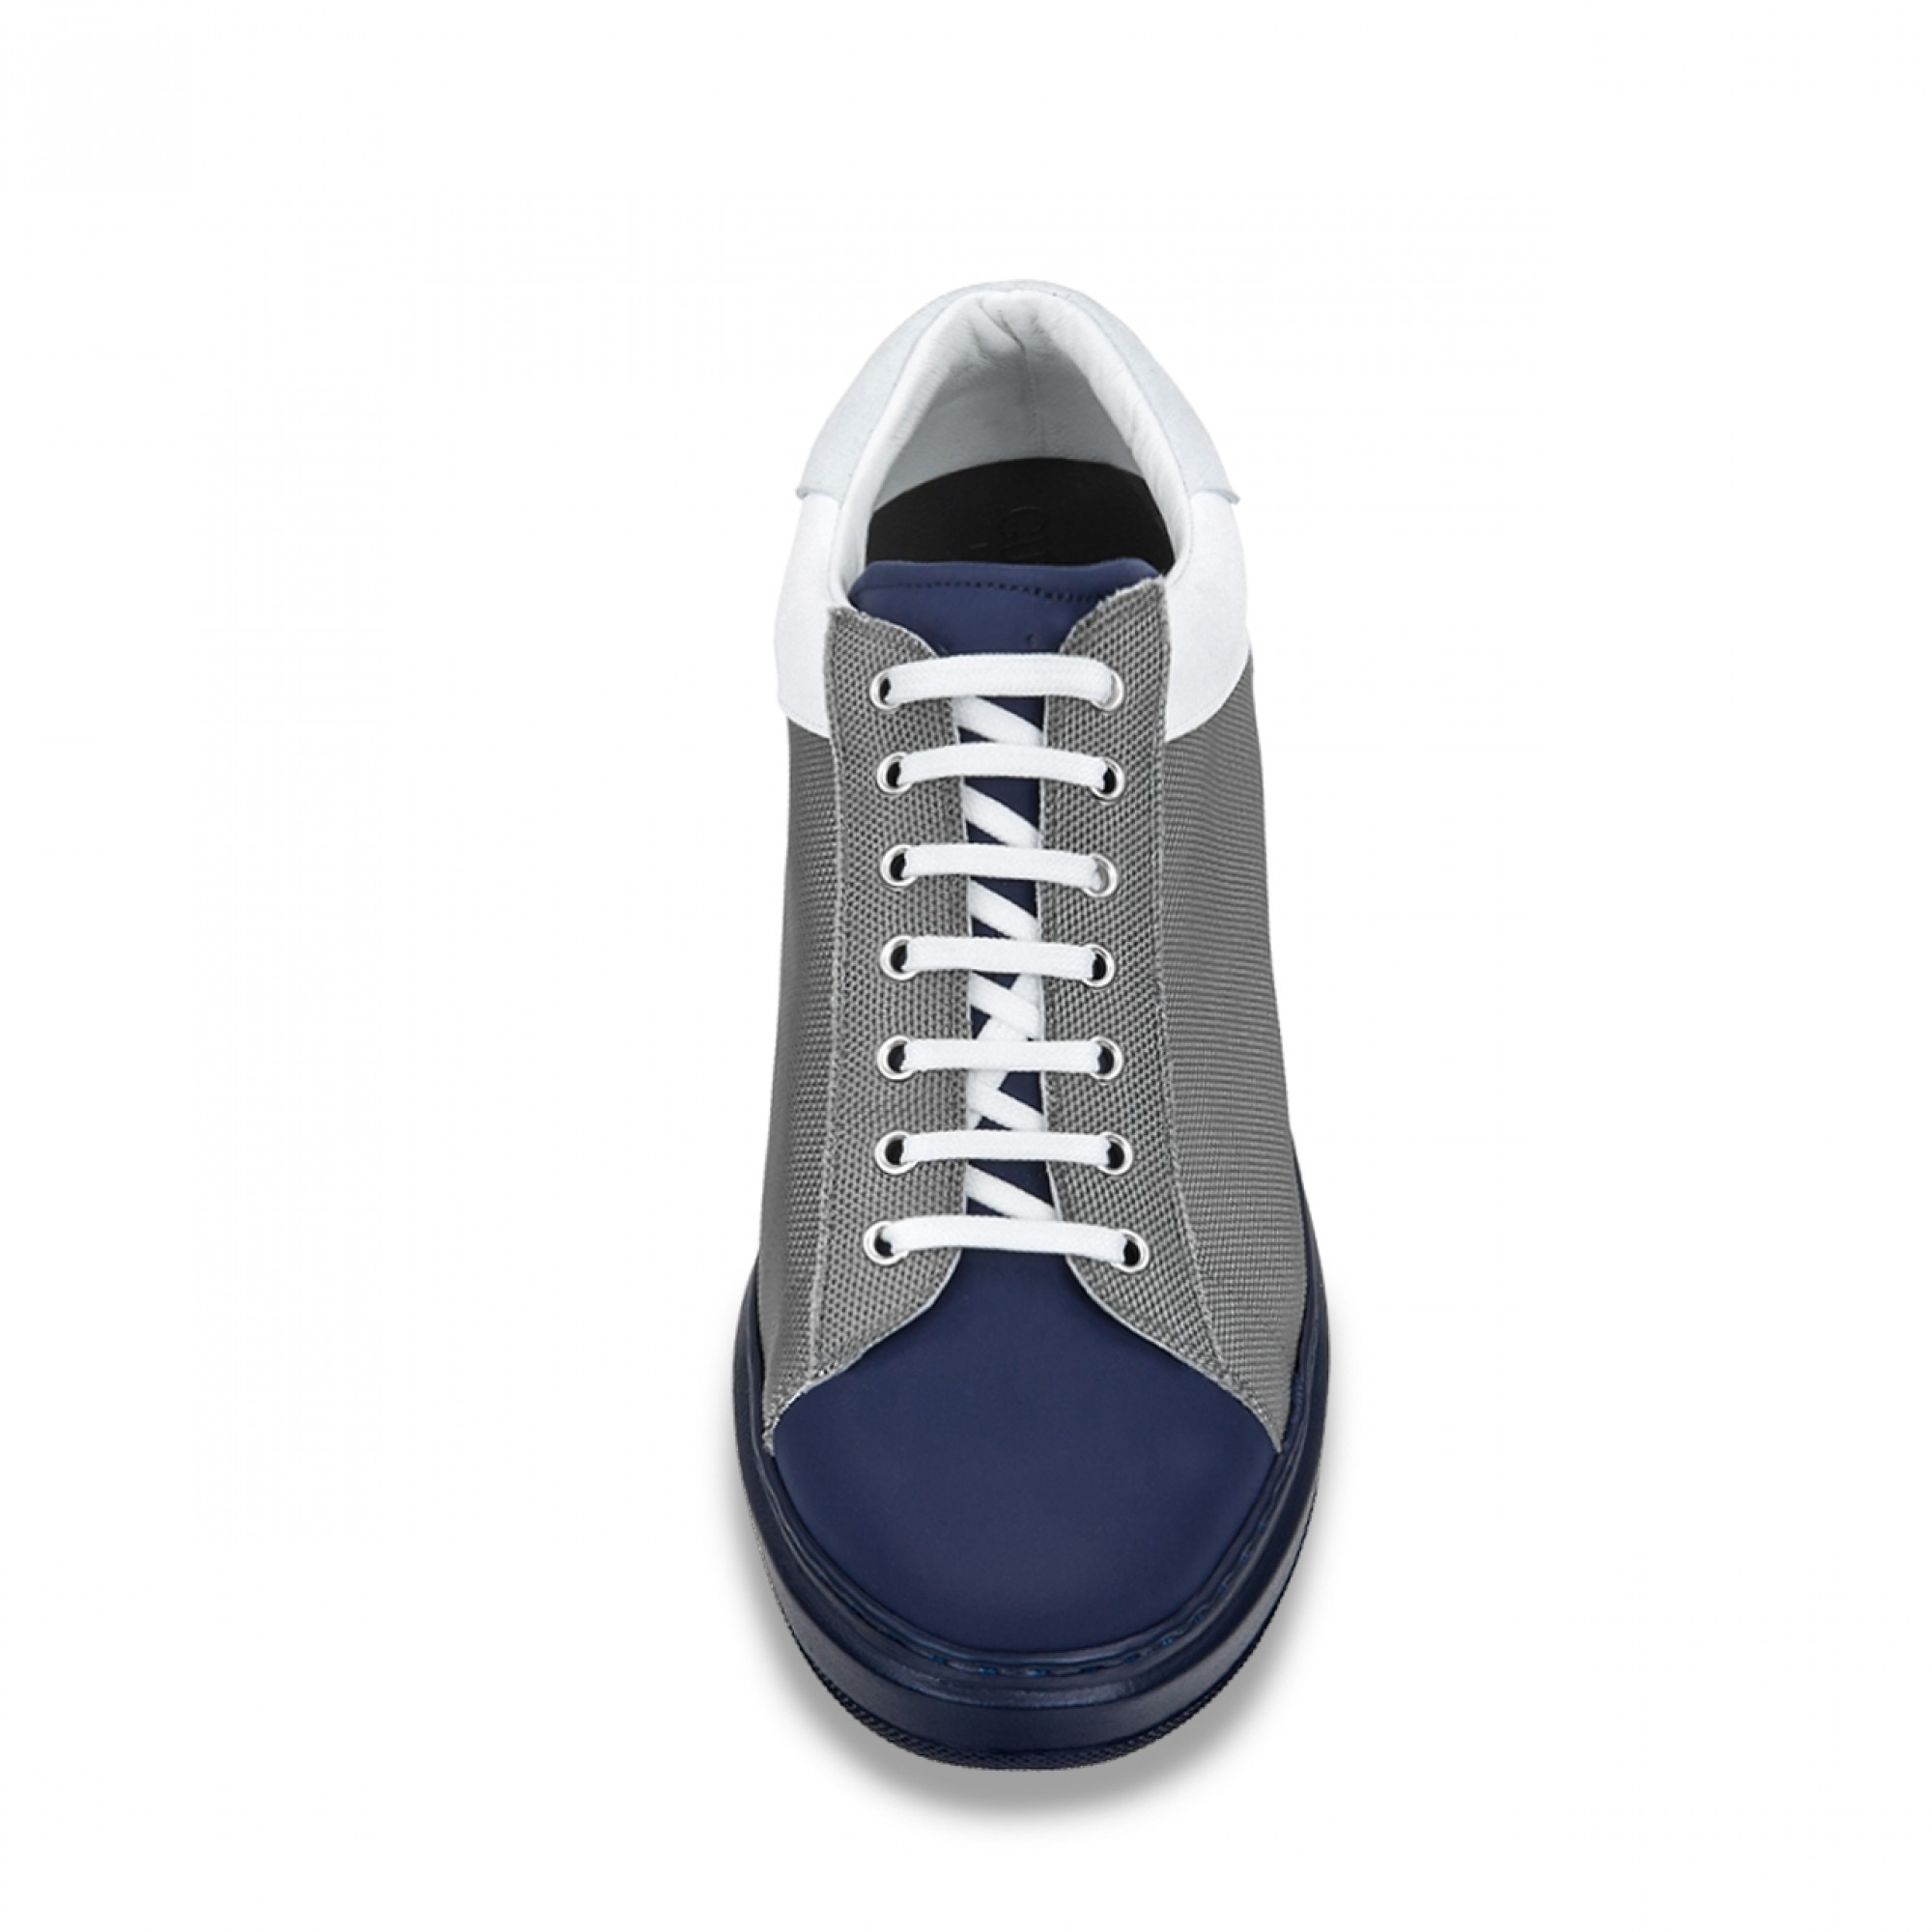 Hydra - Elevator Sneakers in Leather/Fabric from 2.4 to 3.1 inches